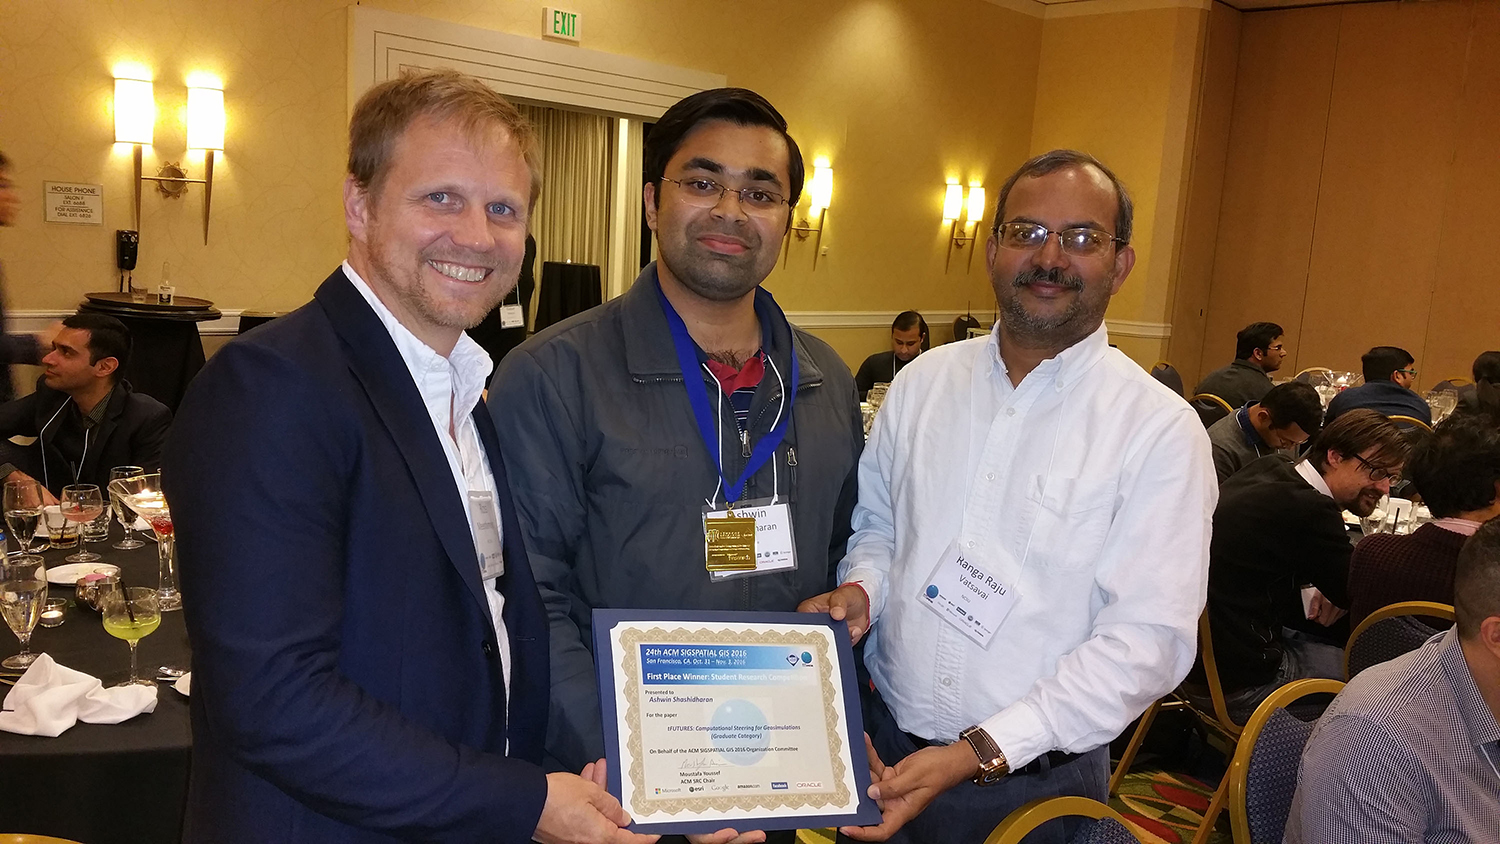 A photo of Ashwin Shashidharan standing with his advisors, Ross Meentemeyer and Raju Vatsavai, and holding an award at the ACM SIGSPATIAL Conference